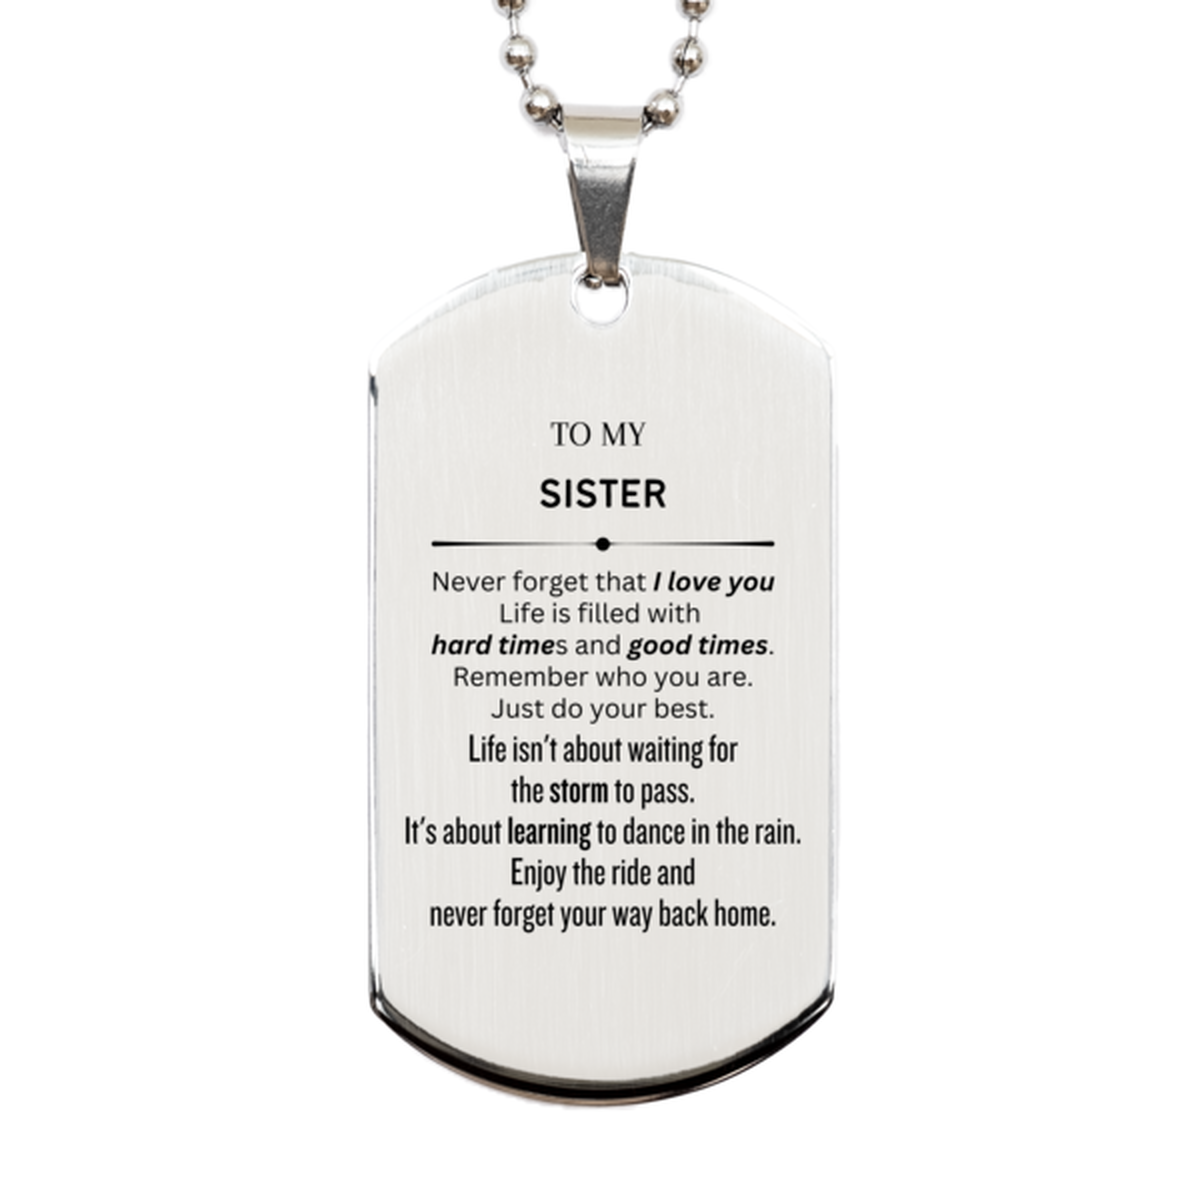 Christmas Sister Silver Dog Tag Gifts, To My Sister Birthday Thank You Gifts For Sister, Graduation Unique Gifts For Sister To My Sister Never forget that I love you life is filled with hard times and good times. Remember who you are. Just do your best